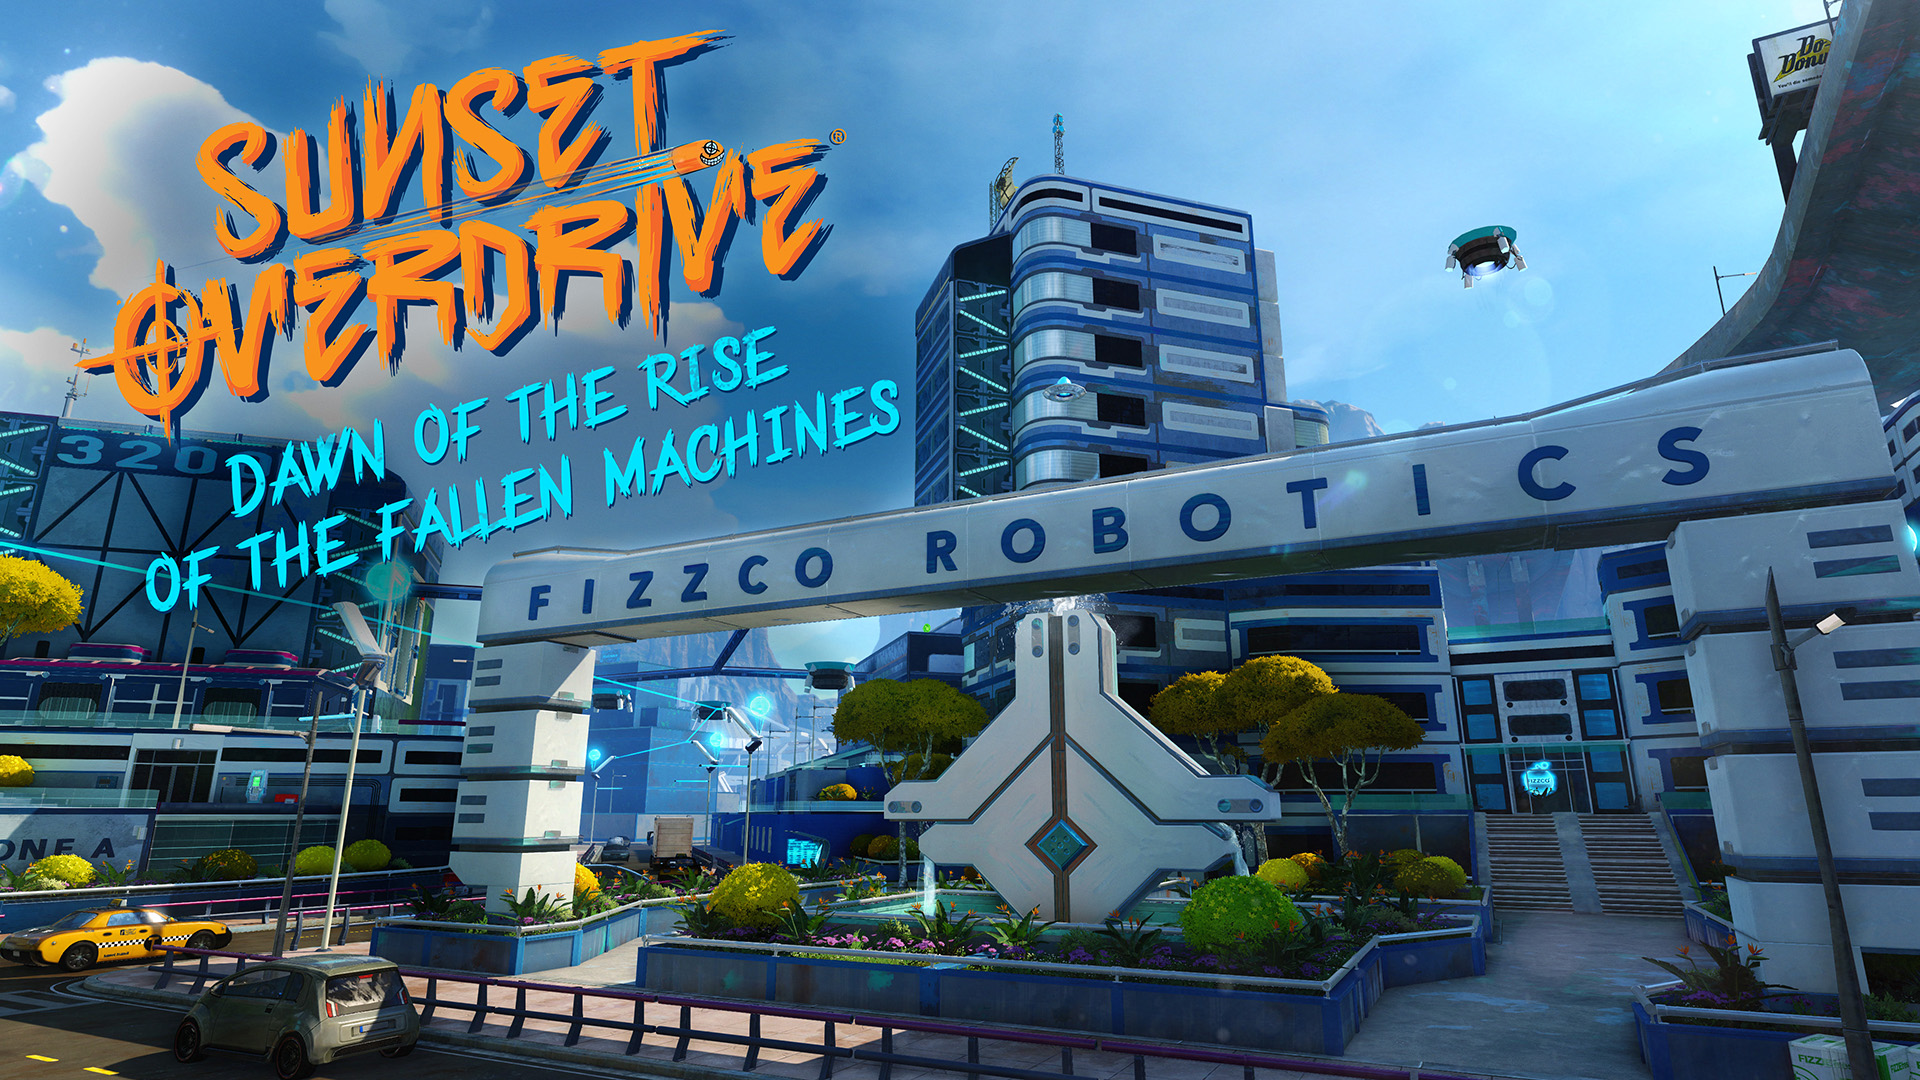 Sunset Overdrive is coming to PC, available on November 16th